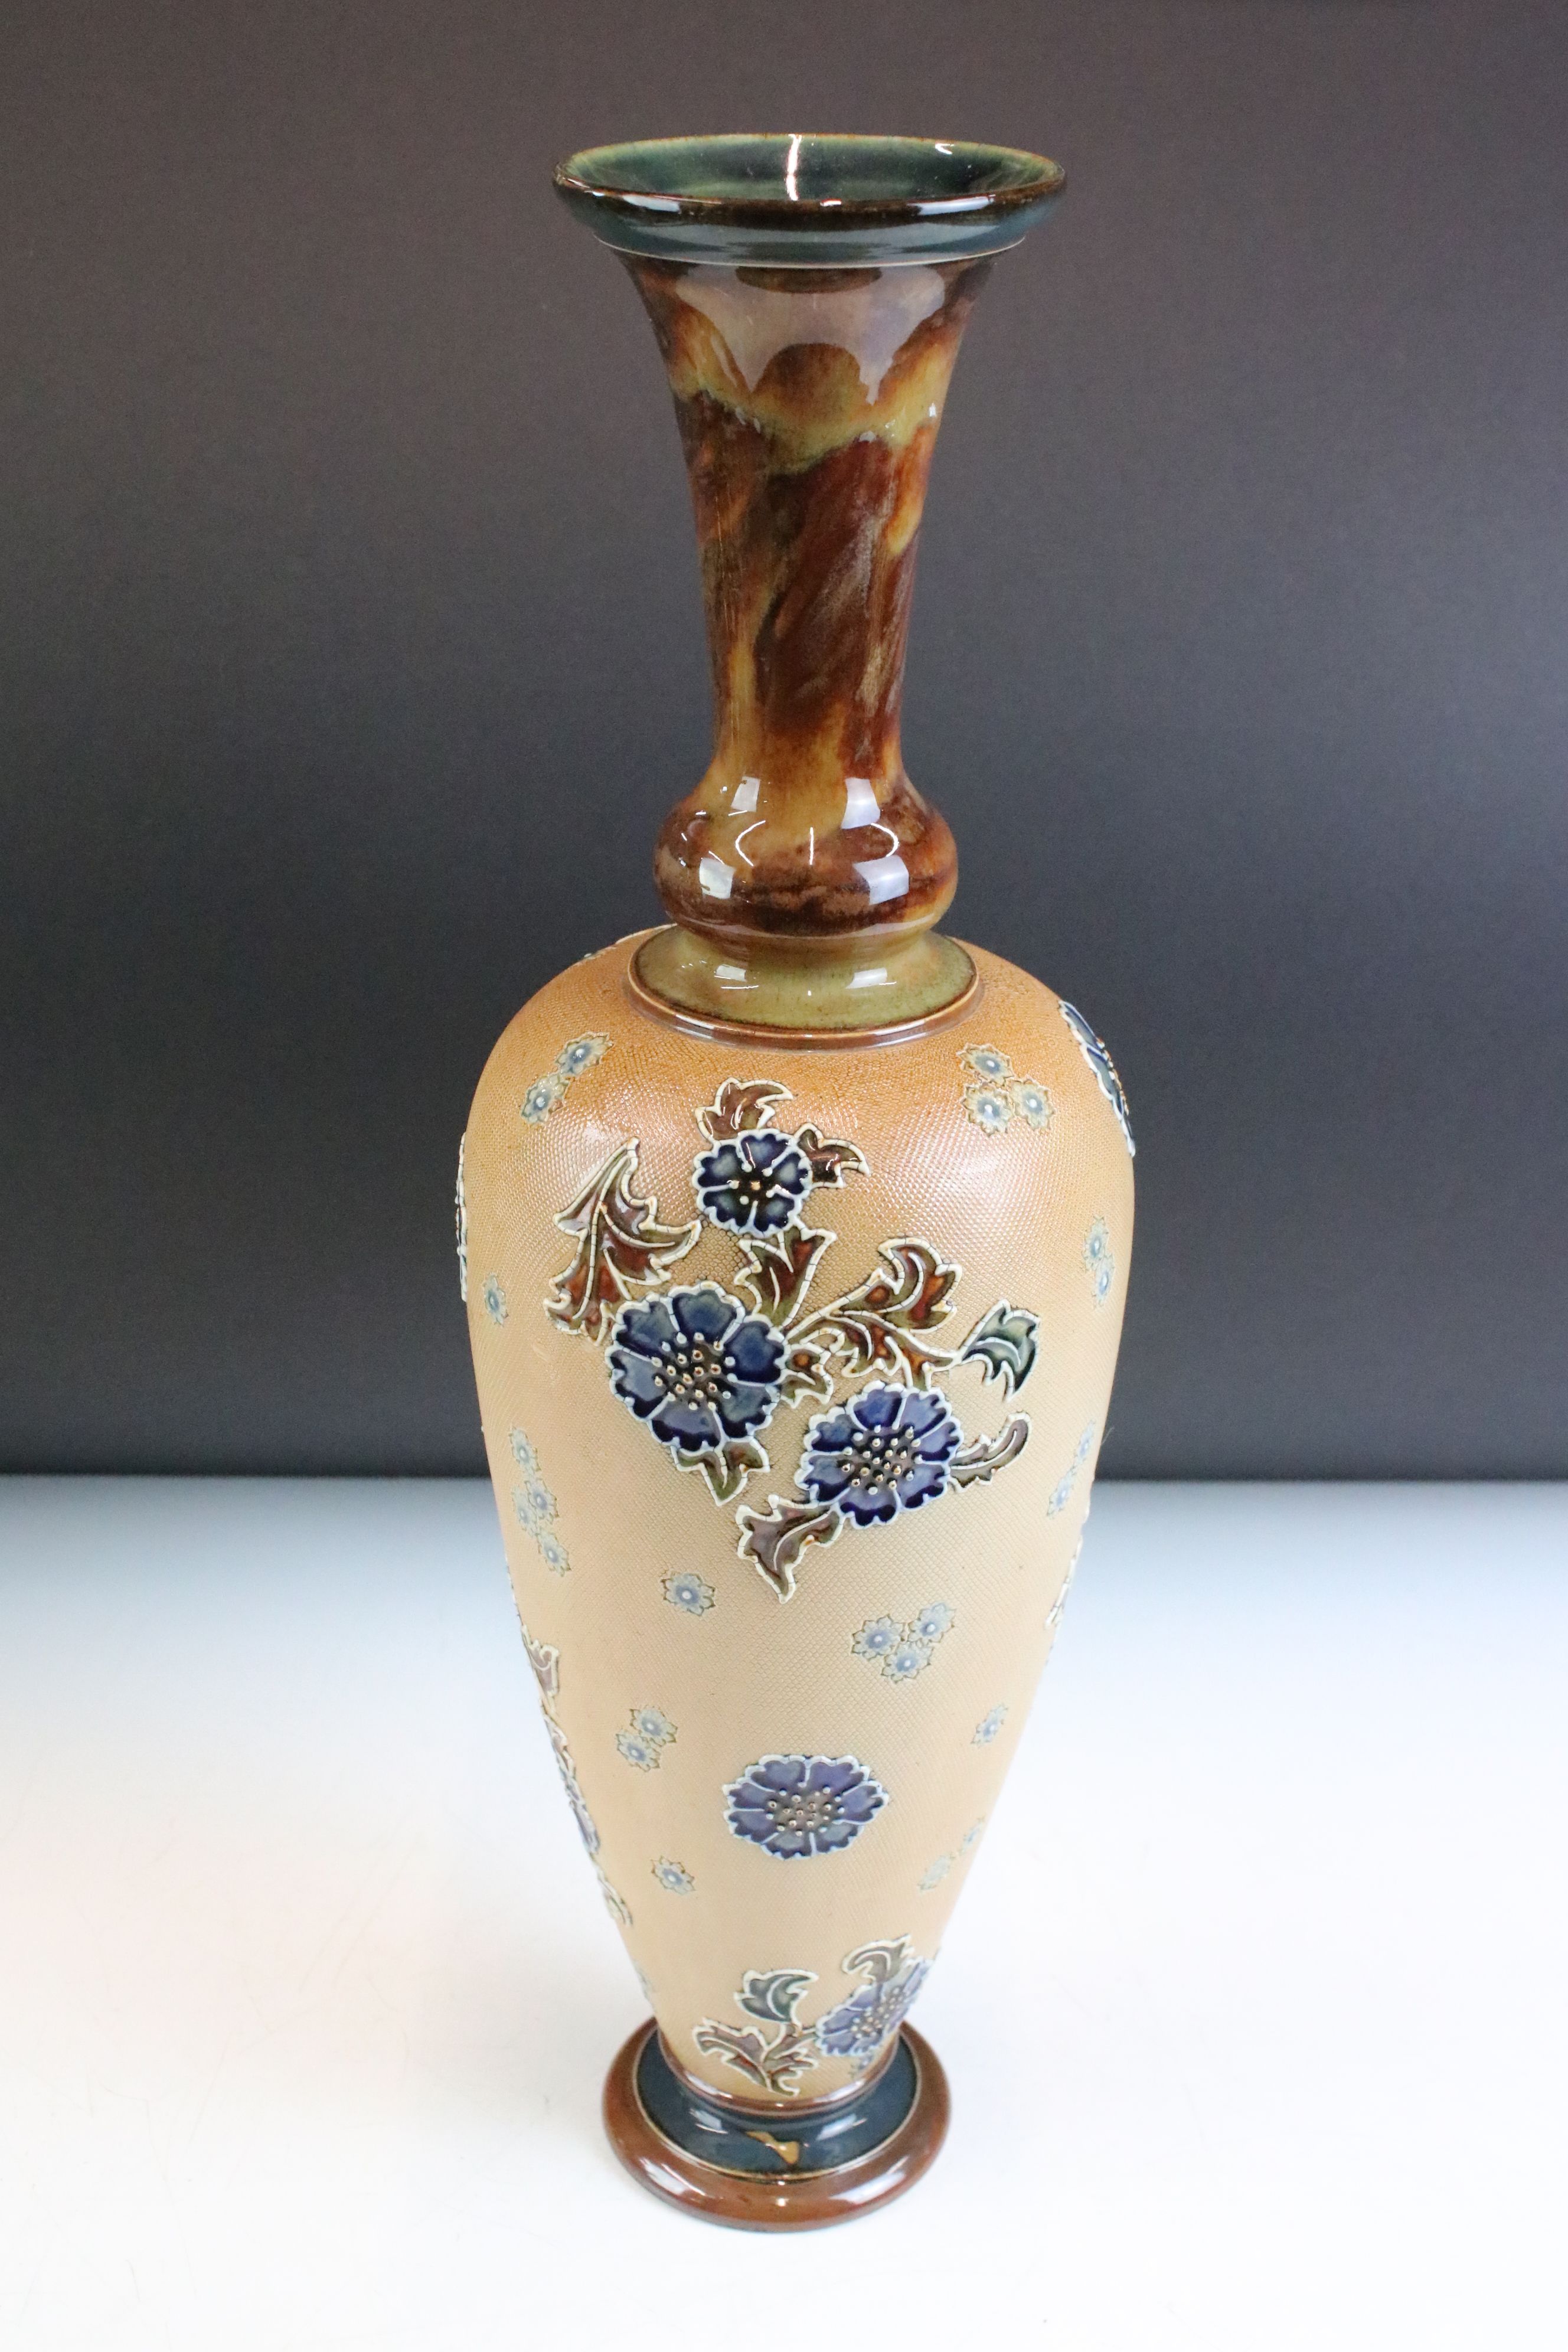 Two antique Doulton vases to include a Royal Doulton ewer jug with a blue drip glaze and gilt panels - Image 6 of 9